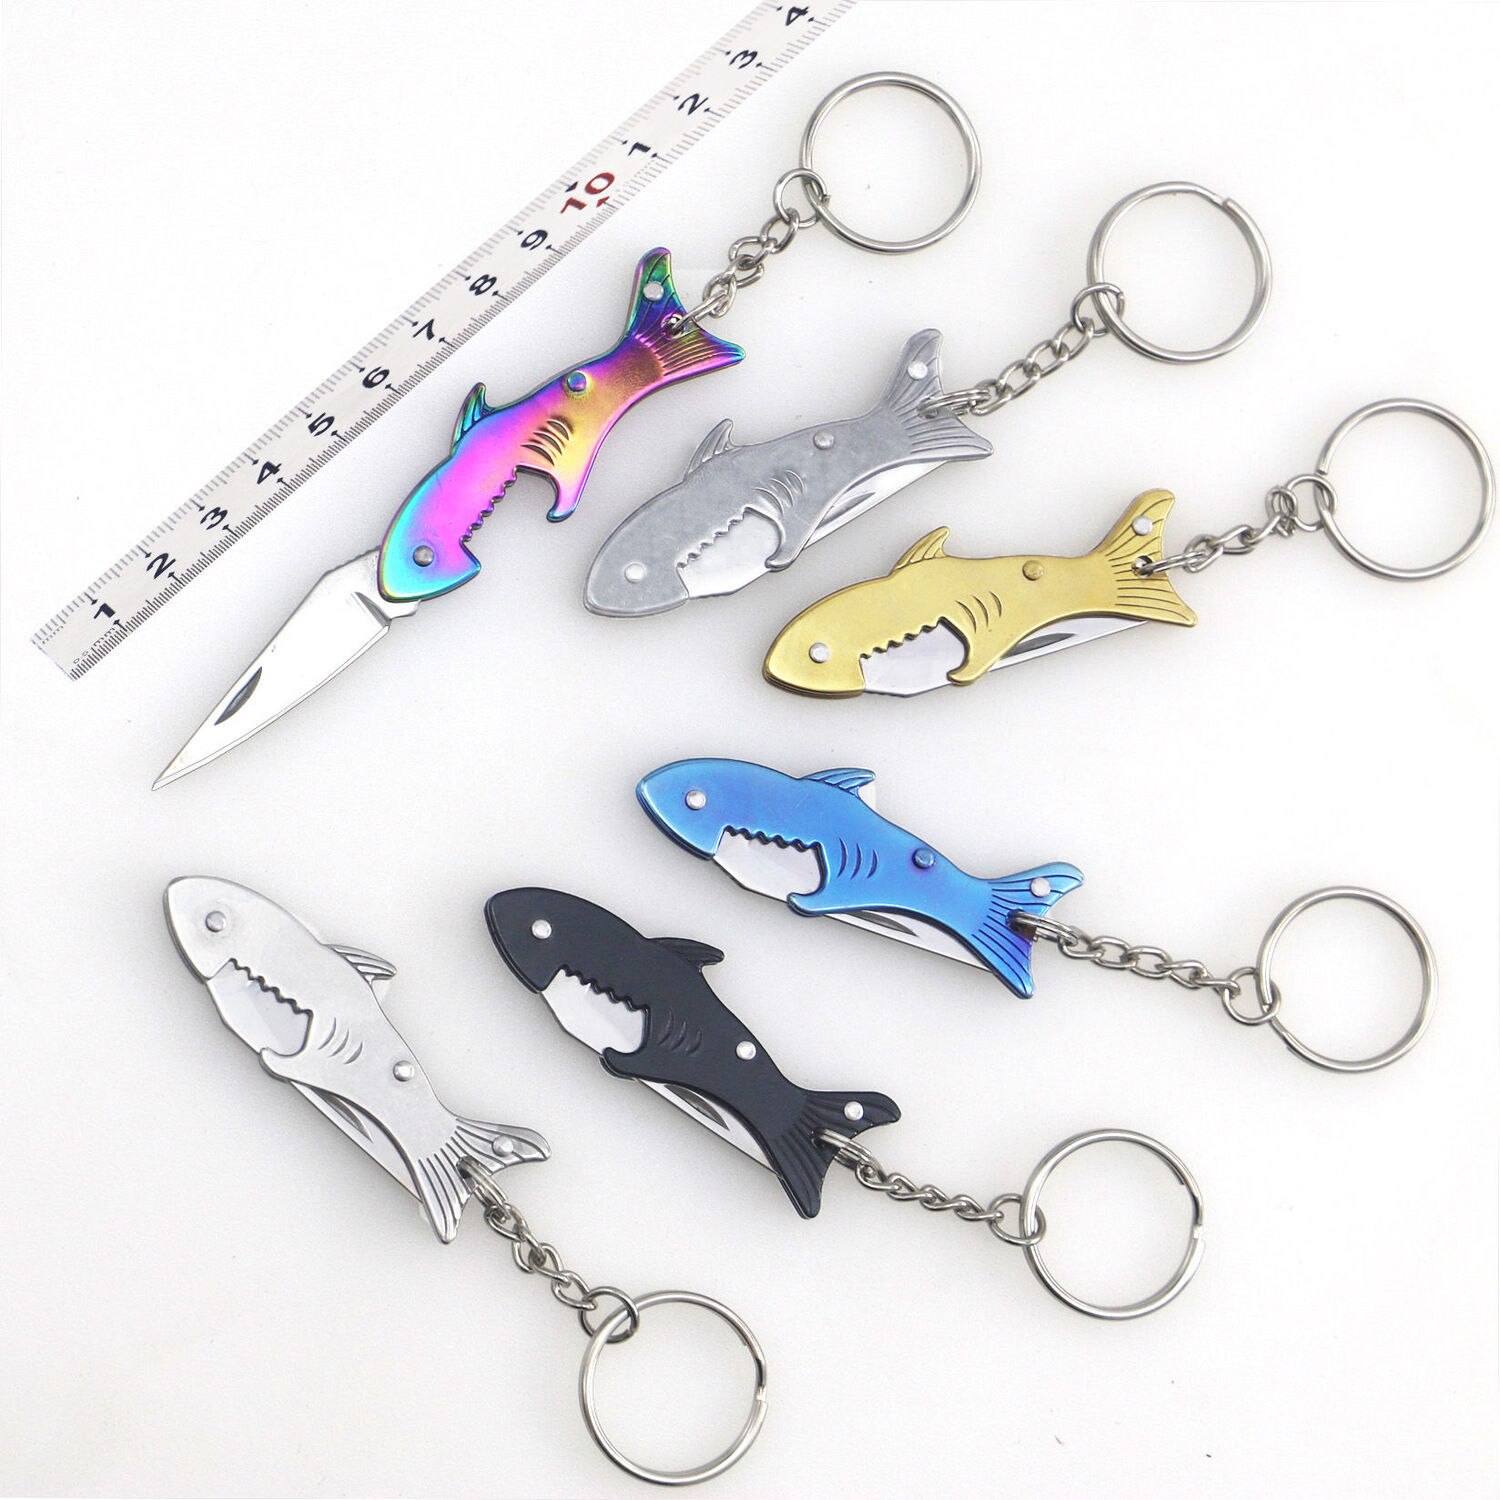 Mini Key Knife Outdoor Camping Self Defense Emergency Survival Knife Tool Portable Size Keyring Ring Keychain 1 - Self Defence Weapon